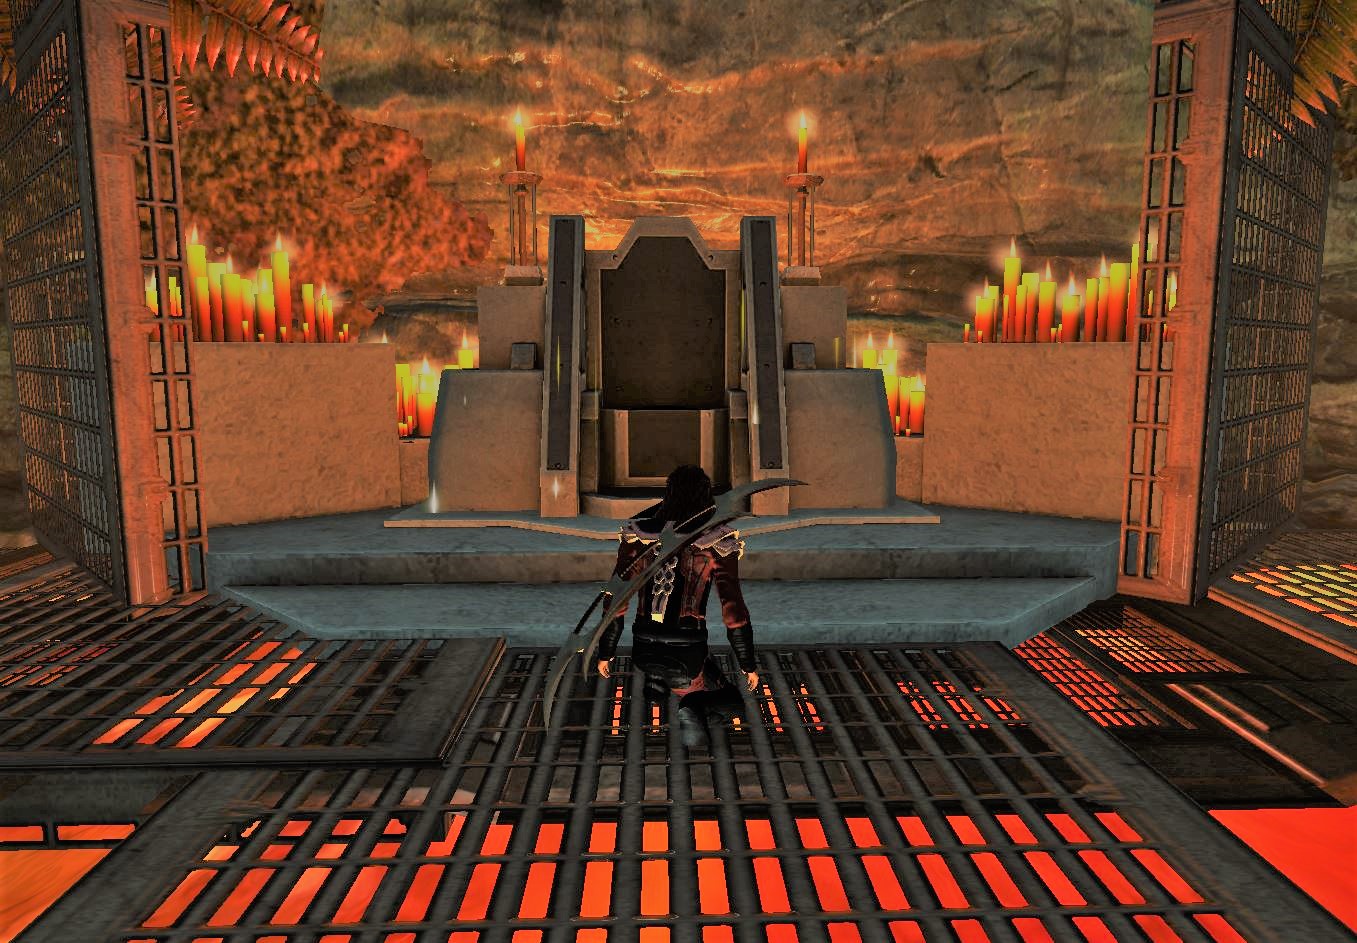 Kneeling before the sacred Shrine of Kahless in awe of its significance and power.